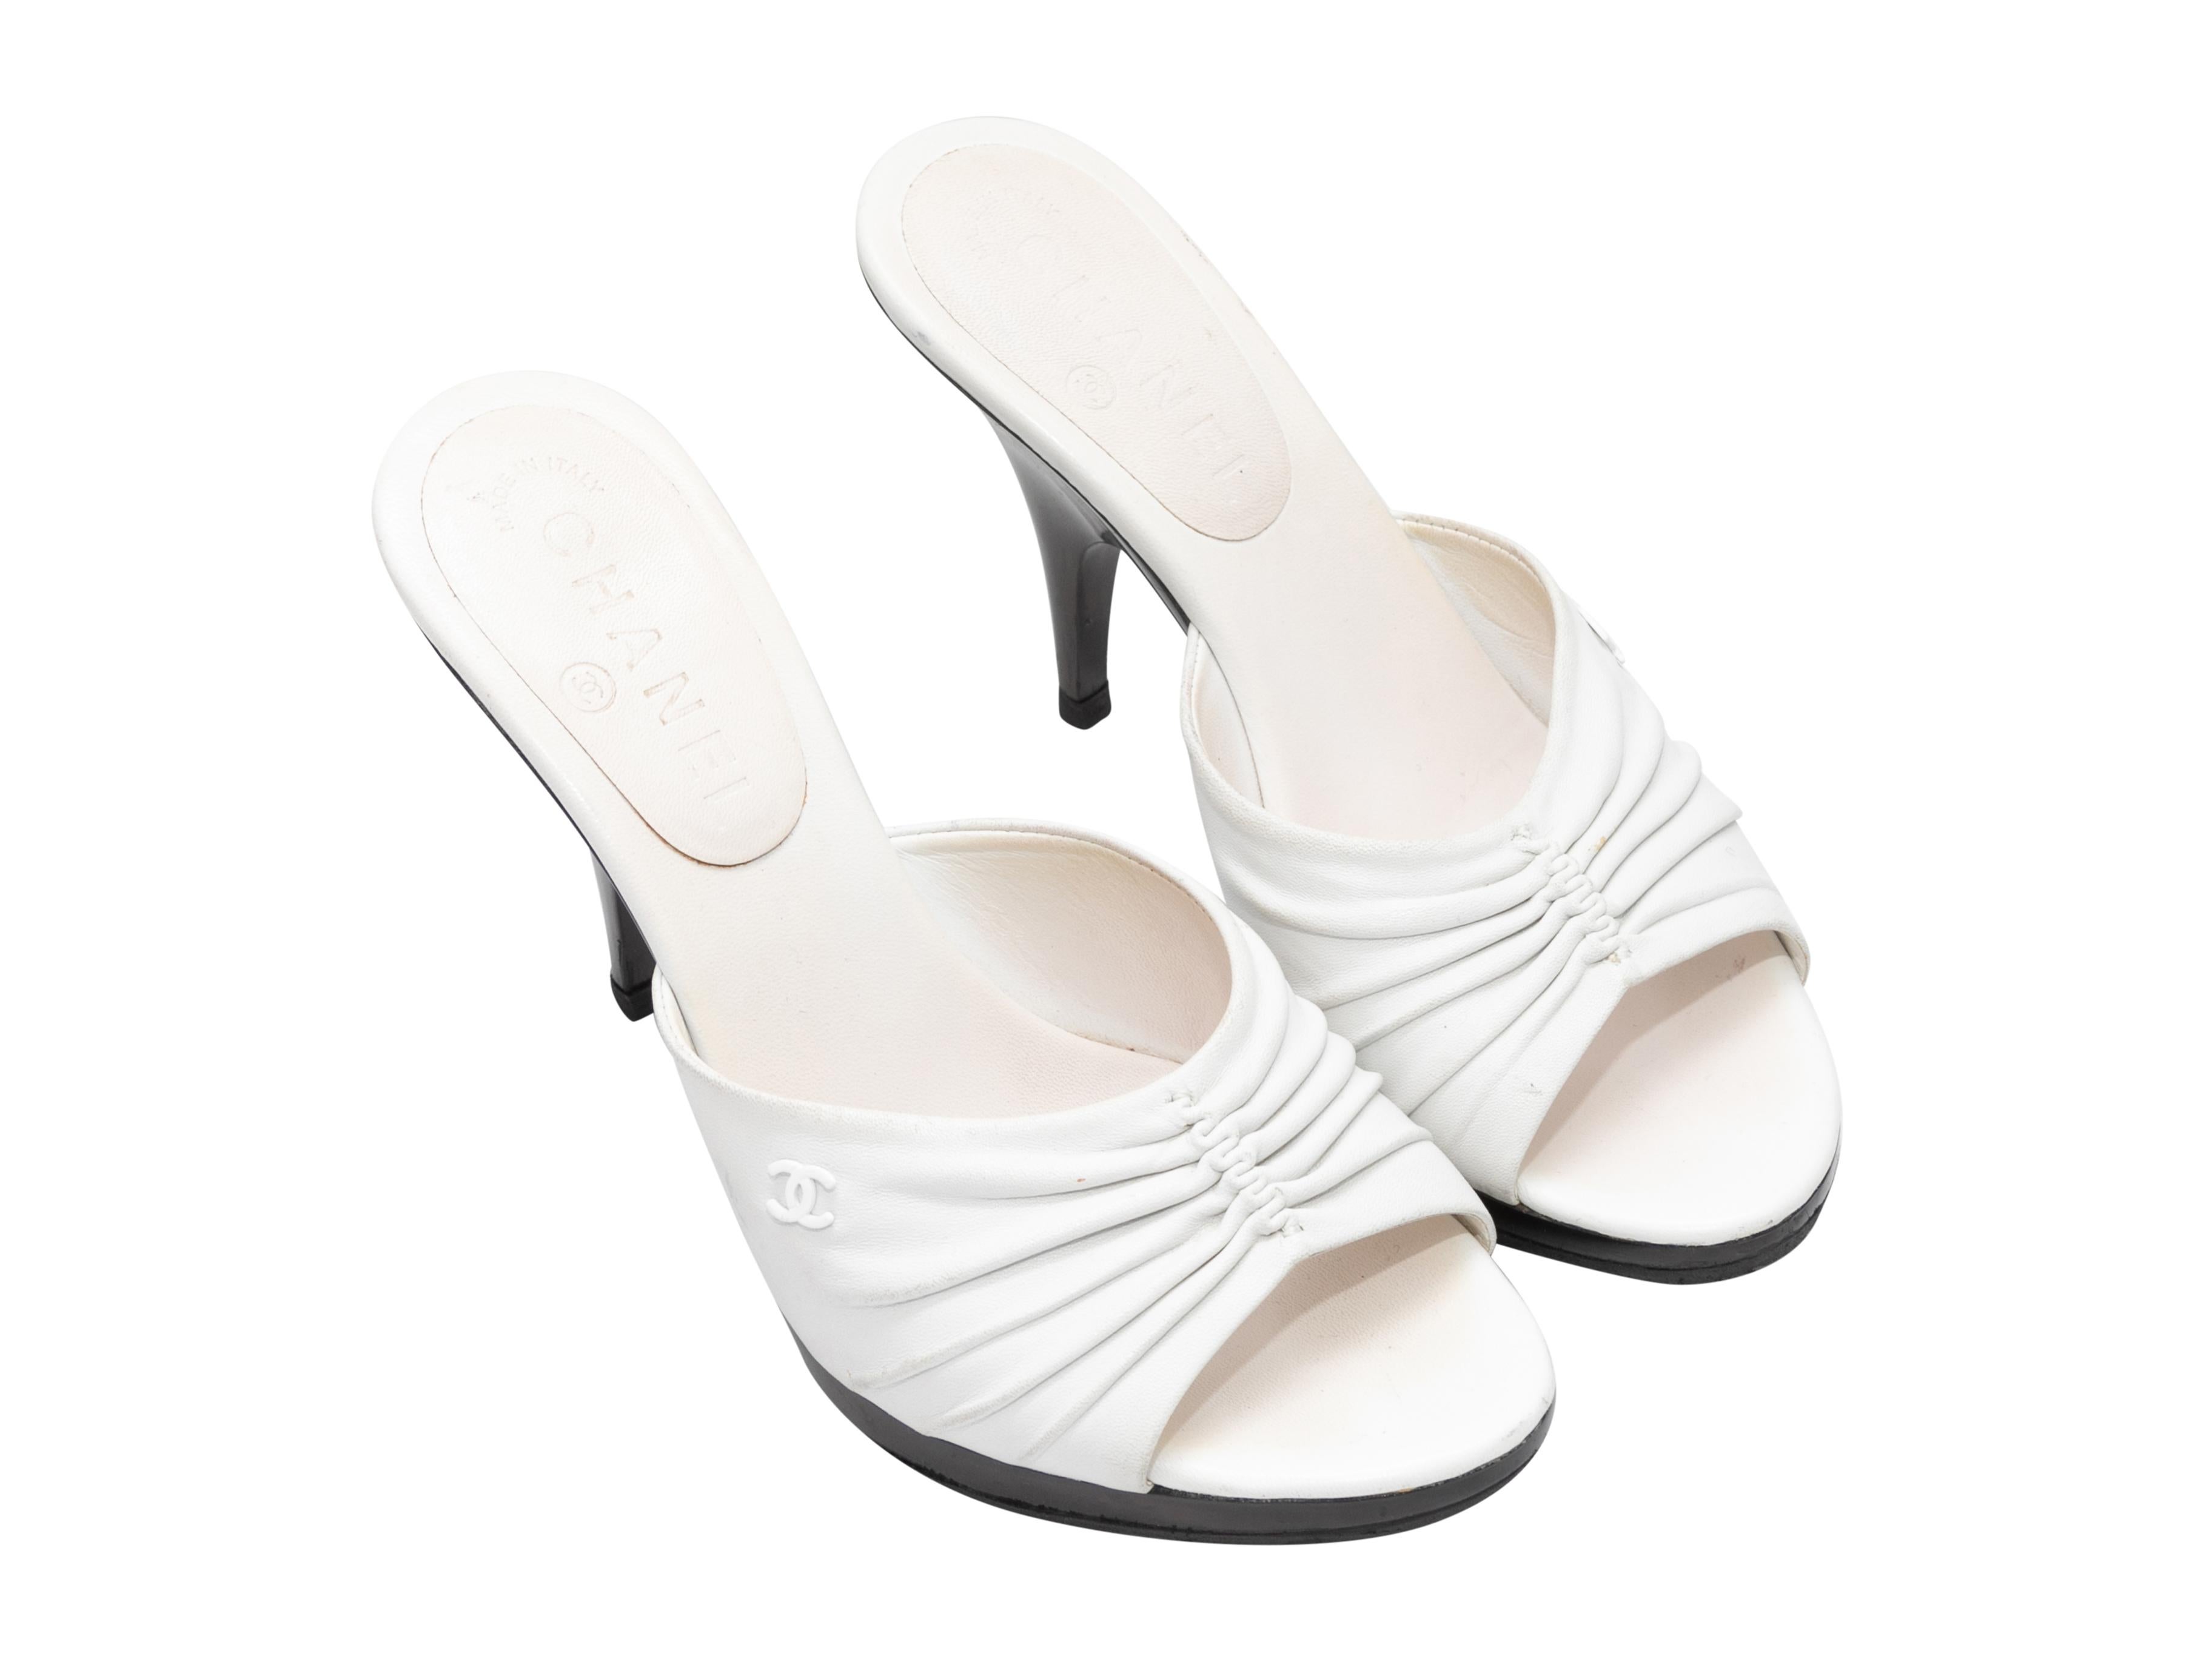 White leather ruched heeled sandals by Chanel. Circa early 2000s. Lacquered heels. 0.5